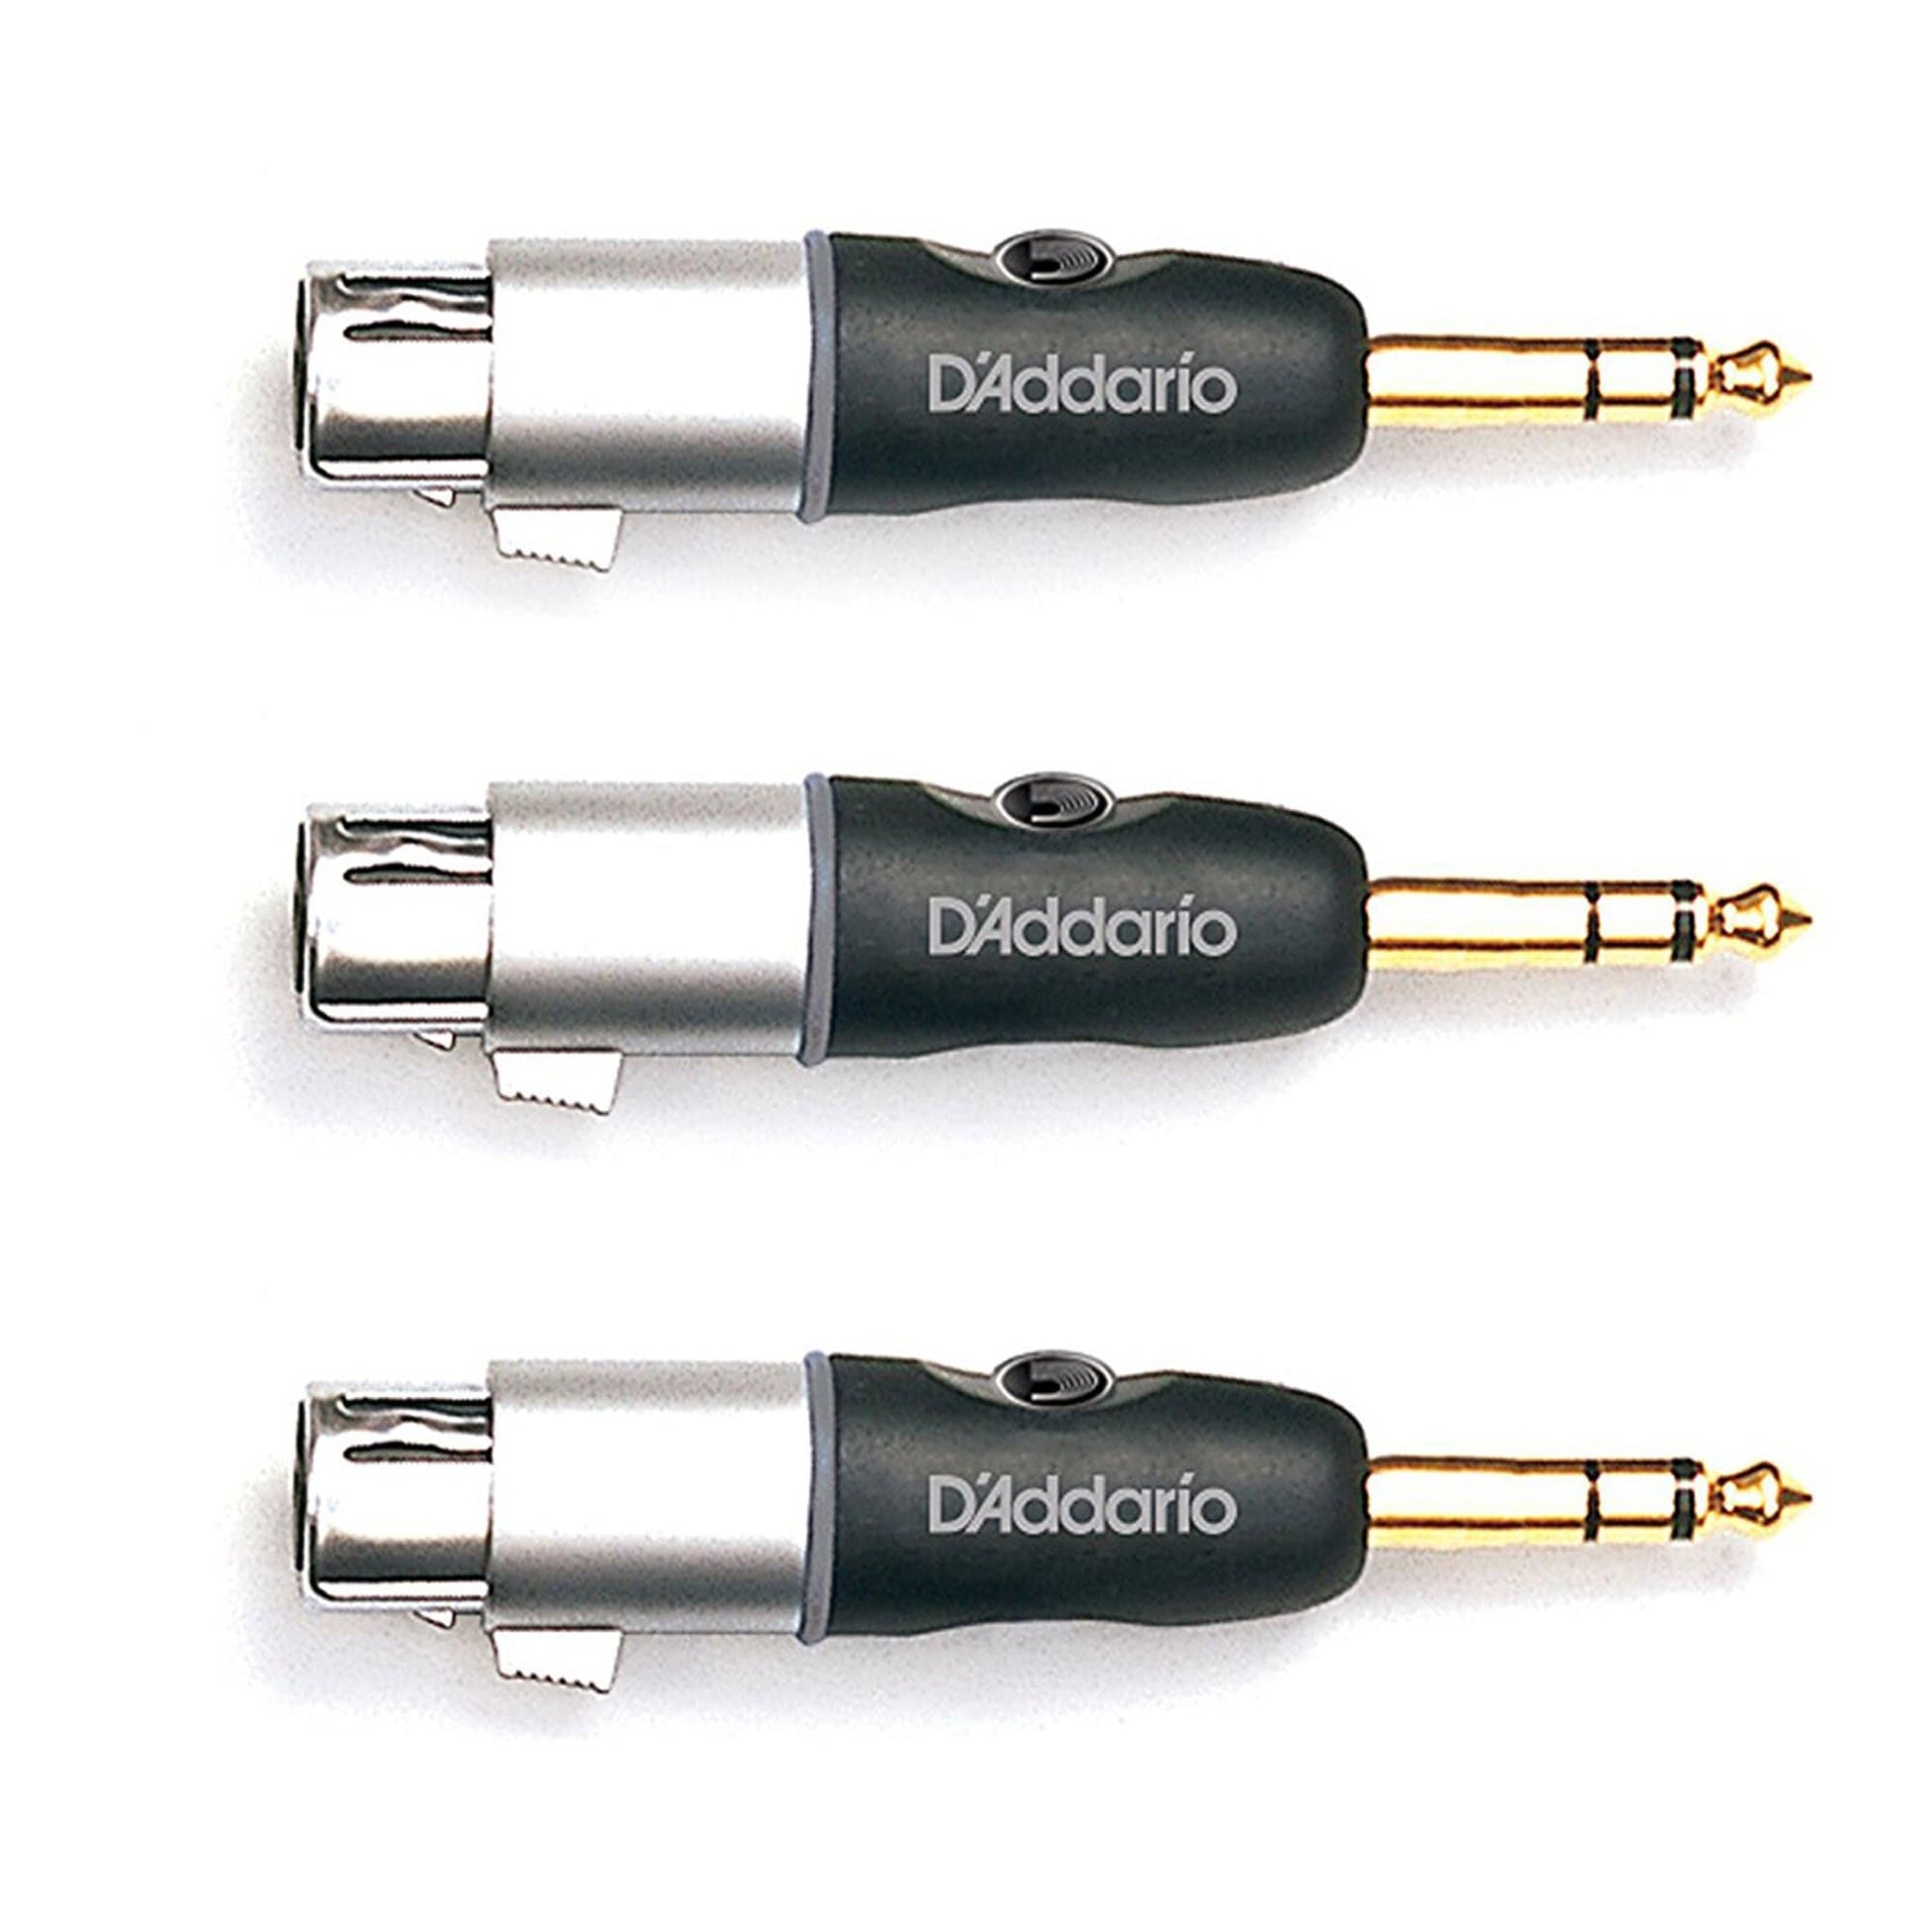 D'Addario 1/4" Male Balanced to XLR Female Adapter 3 Pack Bundle Accessories / Cables